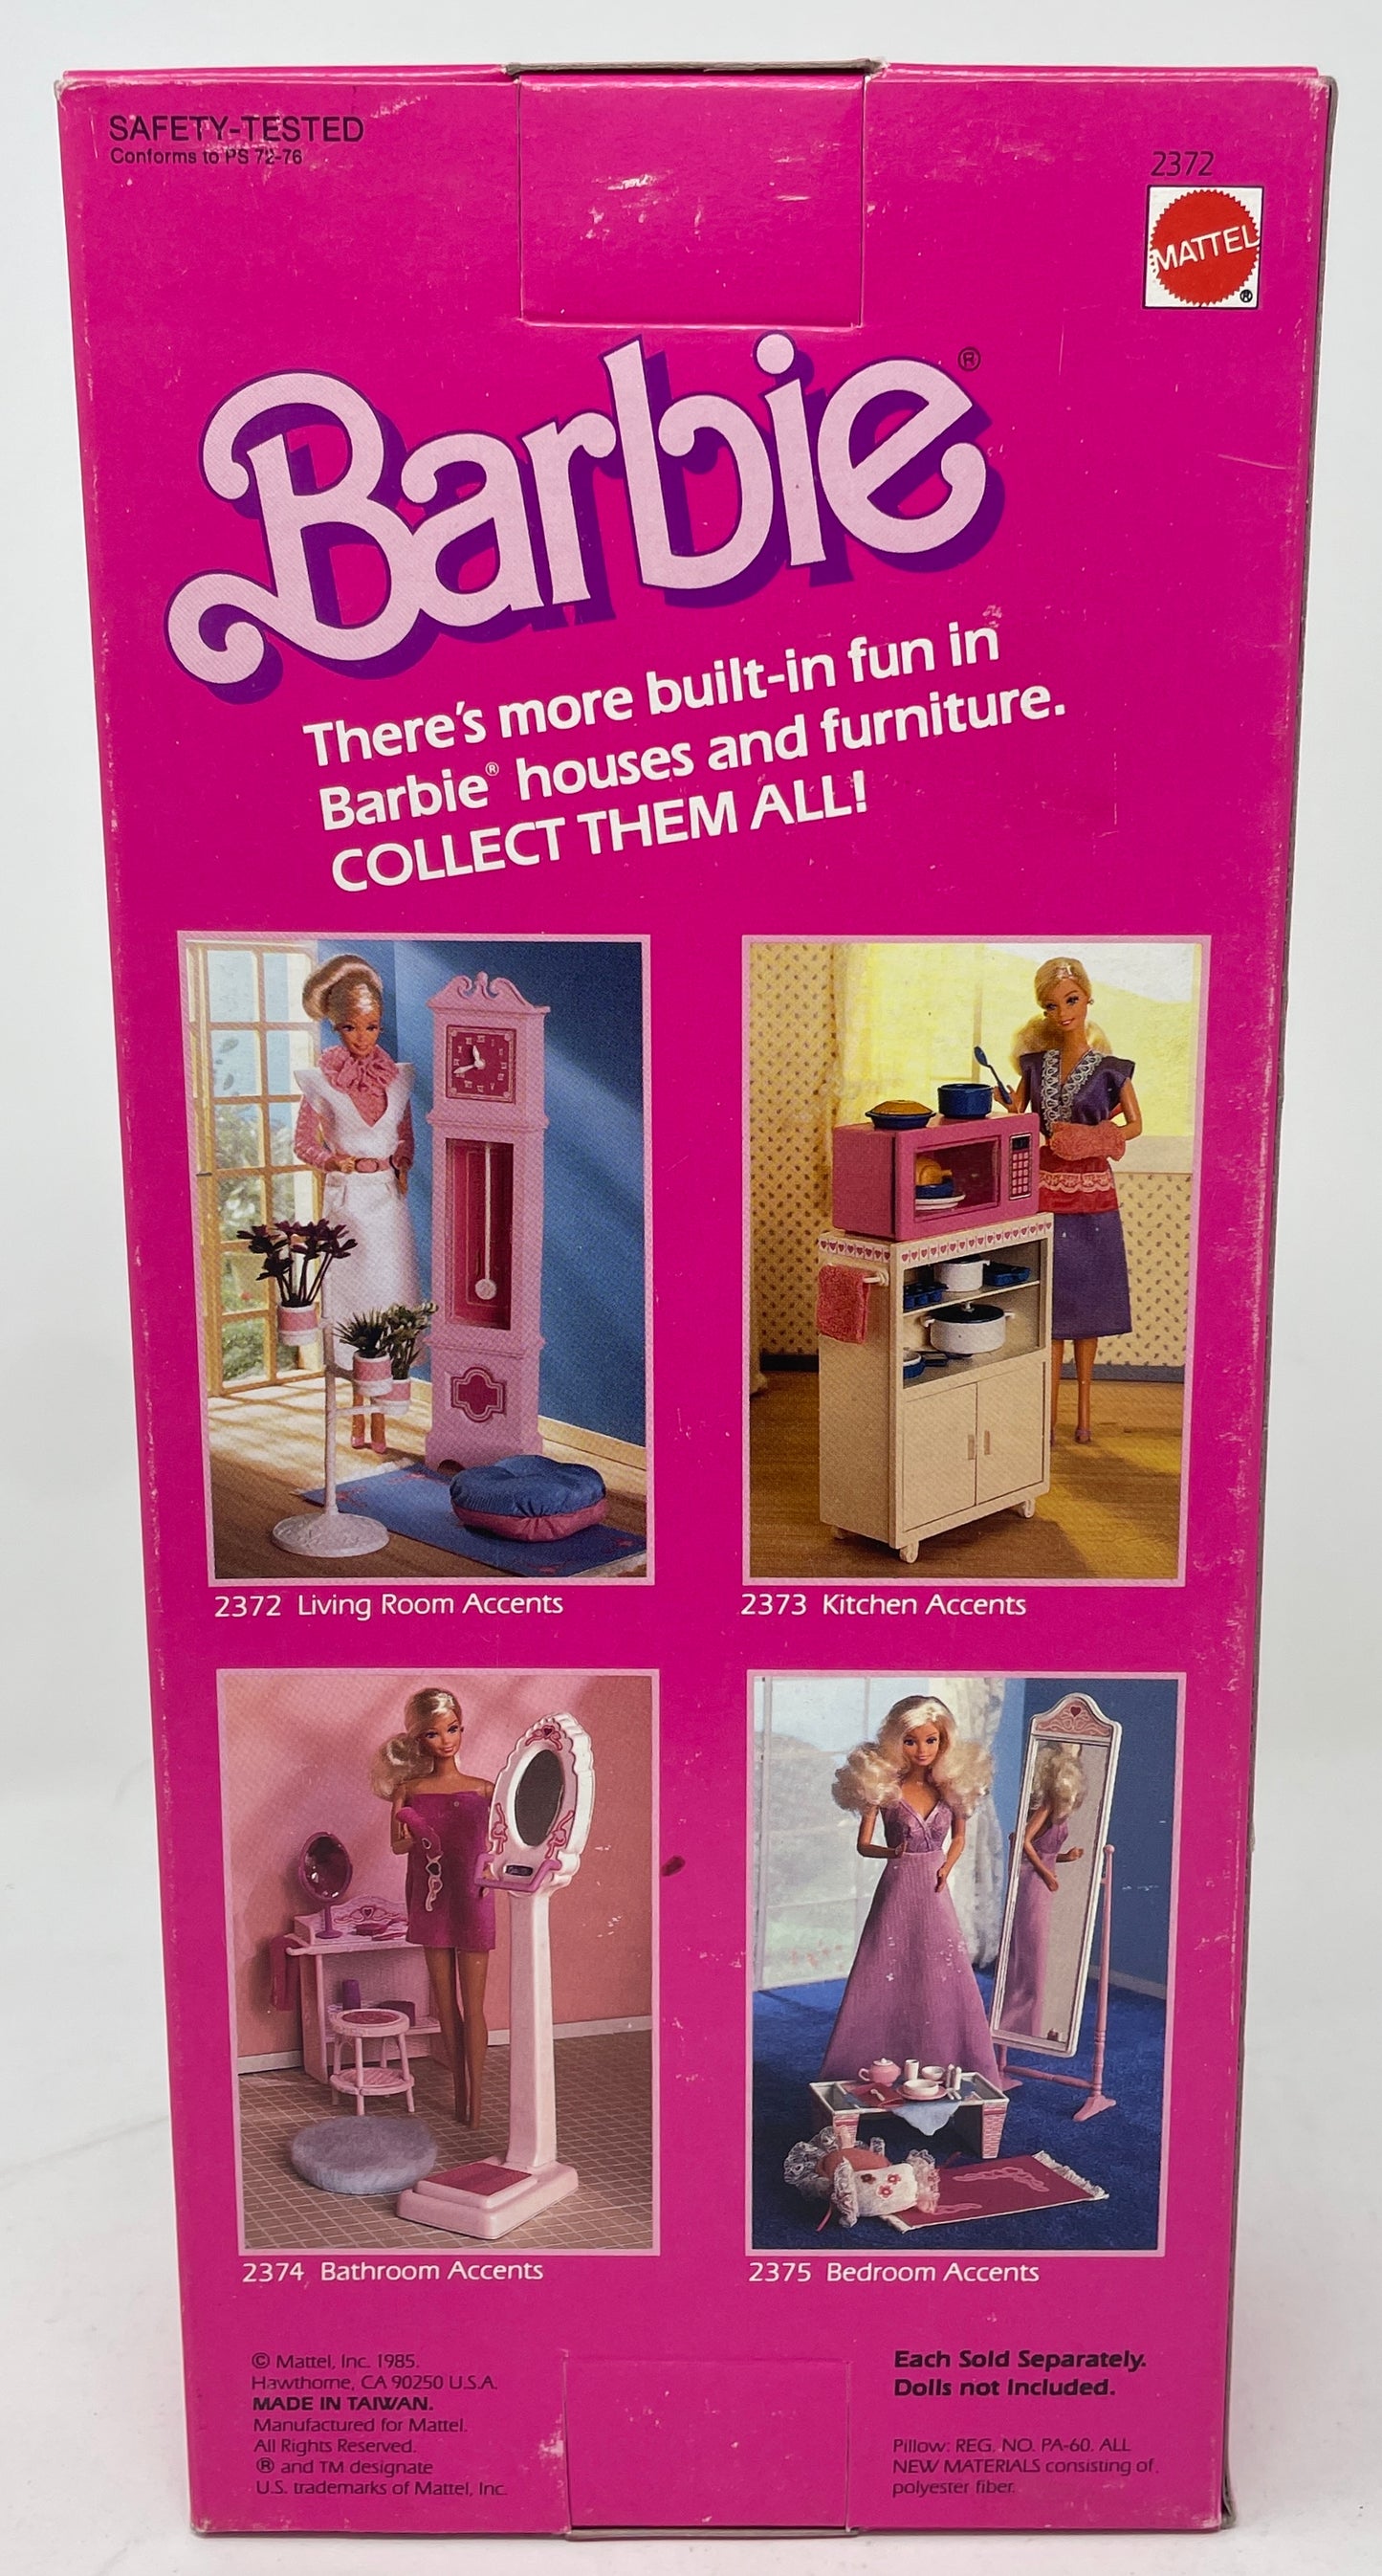 BARBIE LIVING ROOM ACCENTS  - FOR BARBIE HOUSES - #2372 - MATTEL 1985